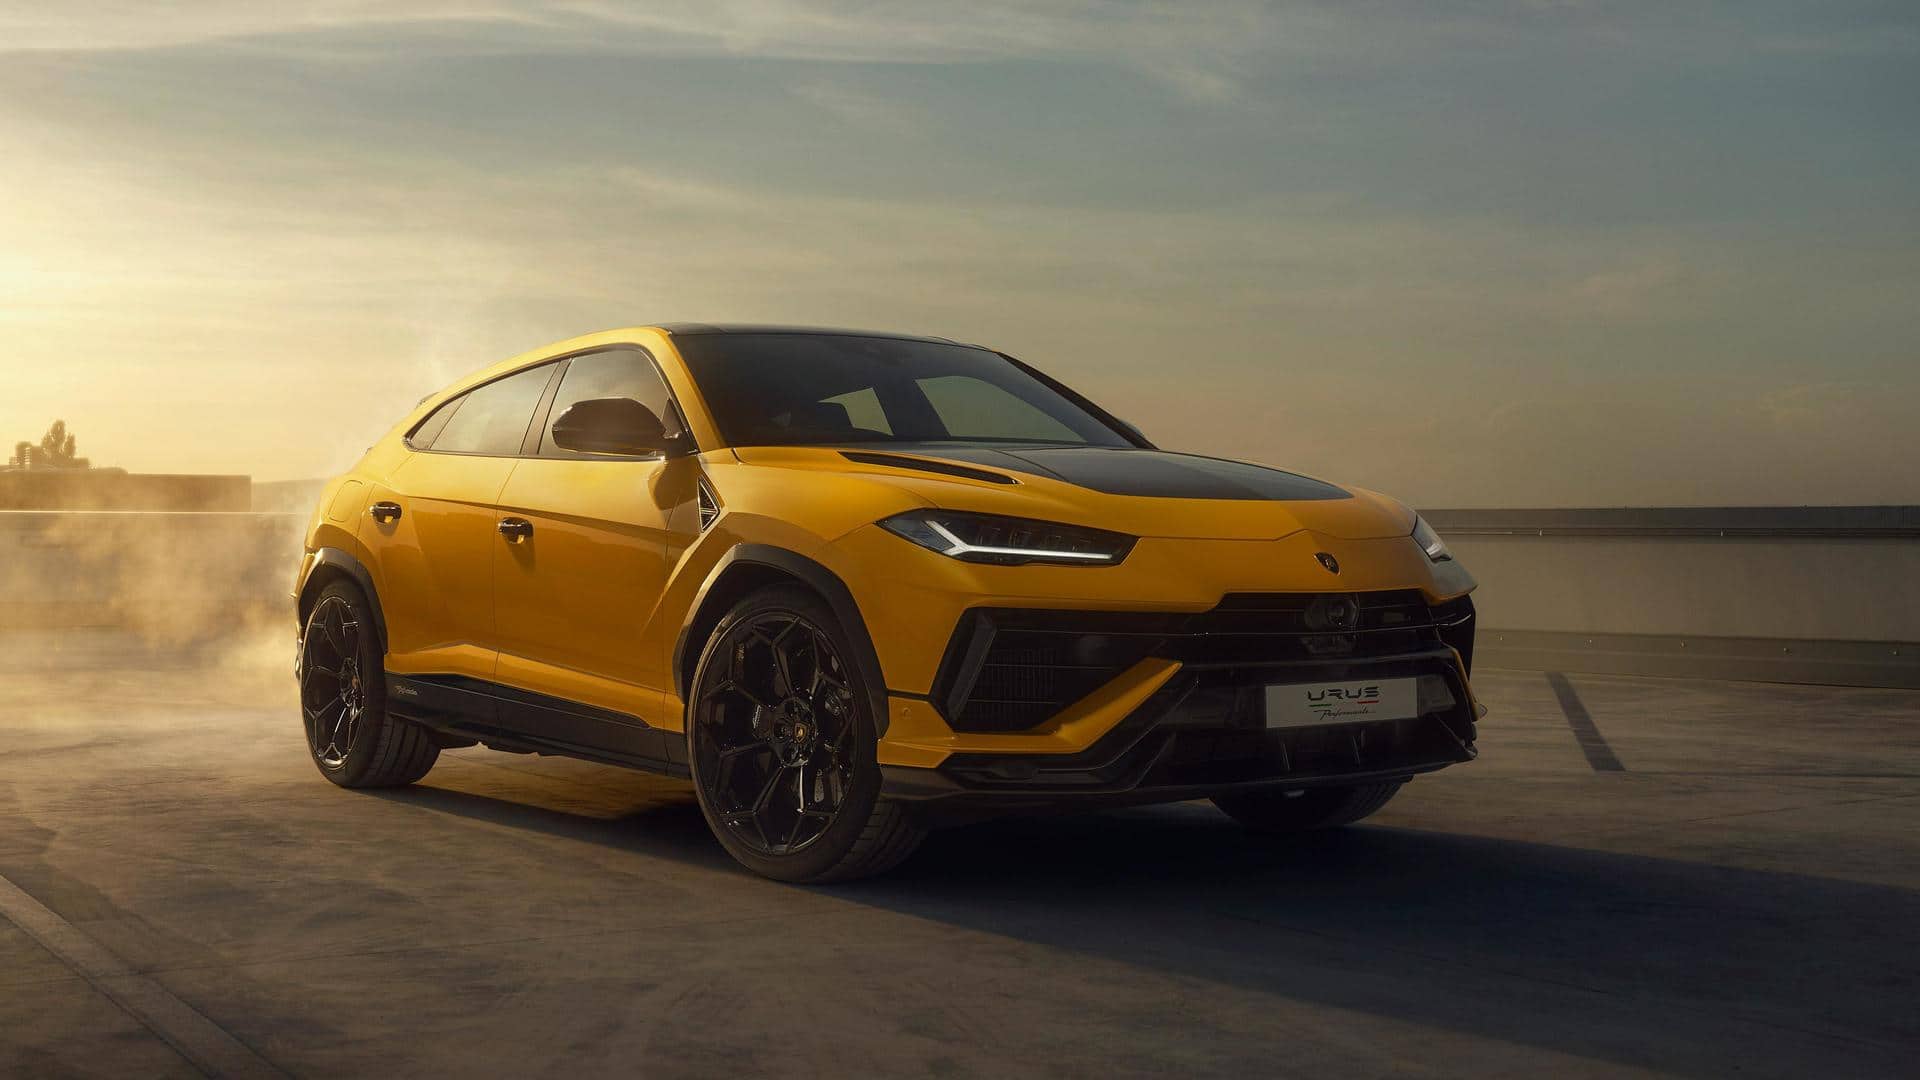 Lamborghini Urus Performante launched at Rs. 4.22 crore: Check features